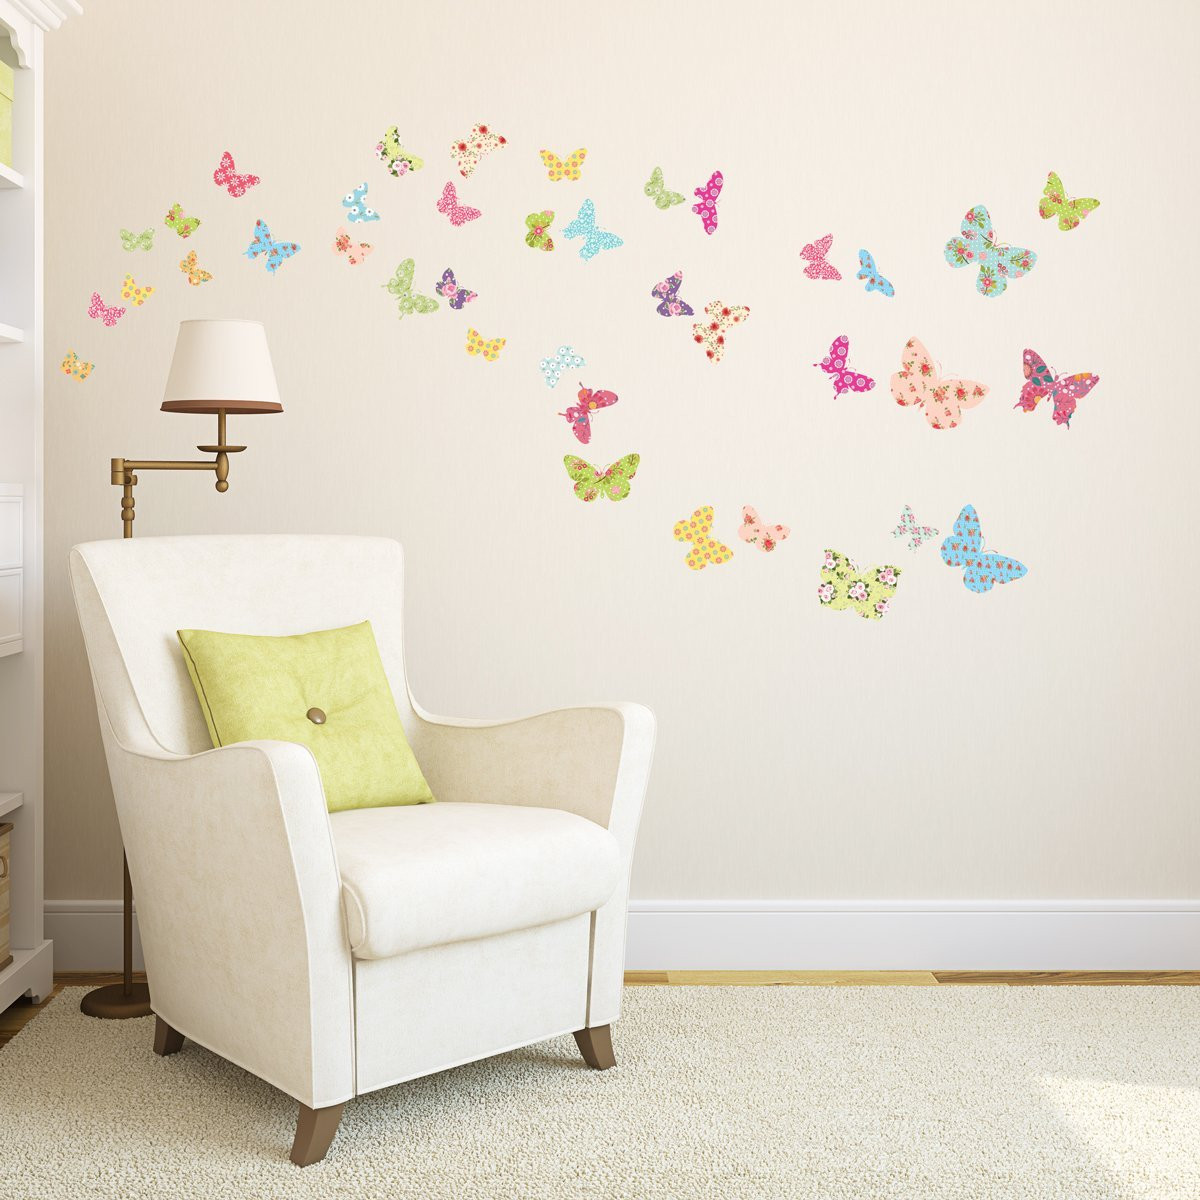 Wall Stickers For Bedroom
 Bedroom Wall Decals for Kids